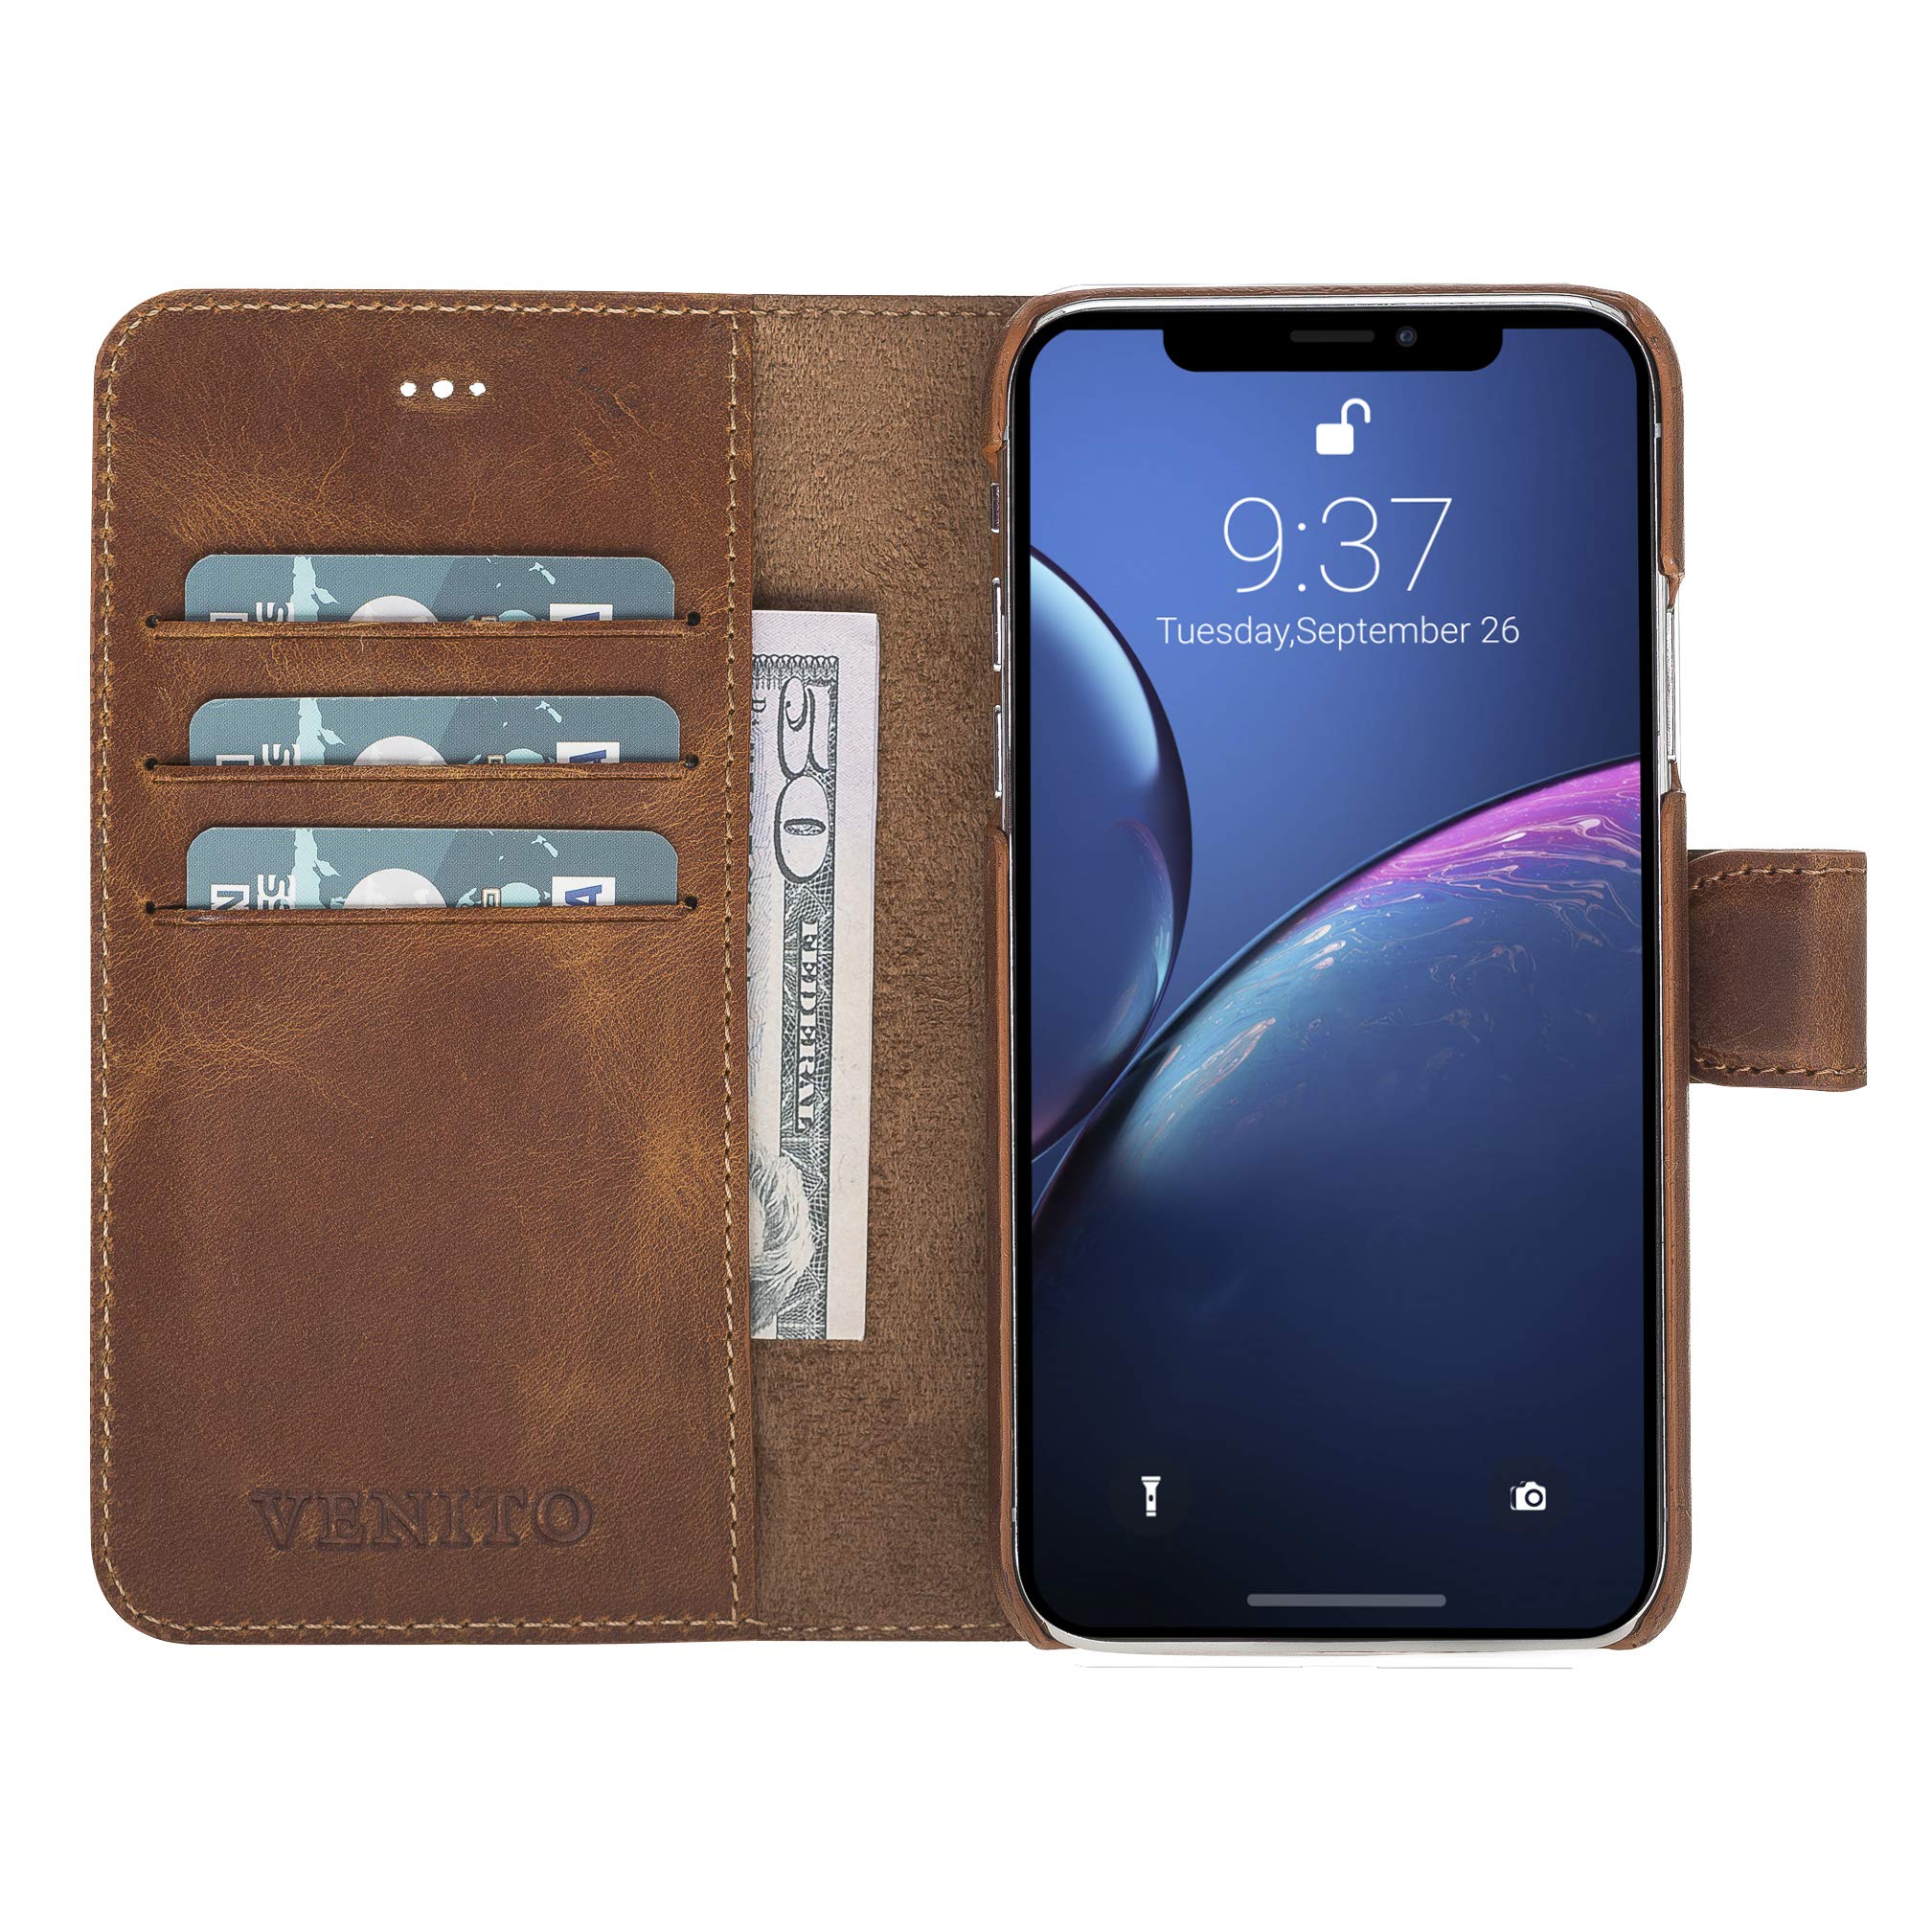 Venito Florence Leather Wallet Phone Case Compatible with iPhone X and iPhone Xs - Extra Secure with RFID Blocking - Detachable Phone Wallet - Antique Brown